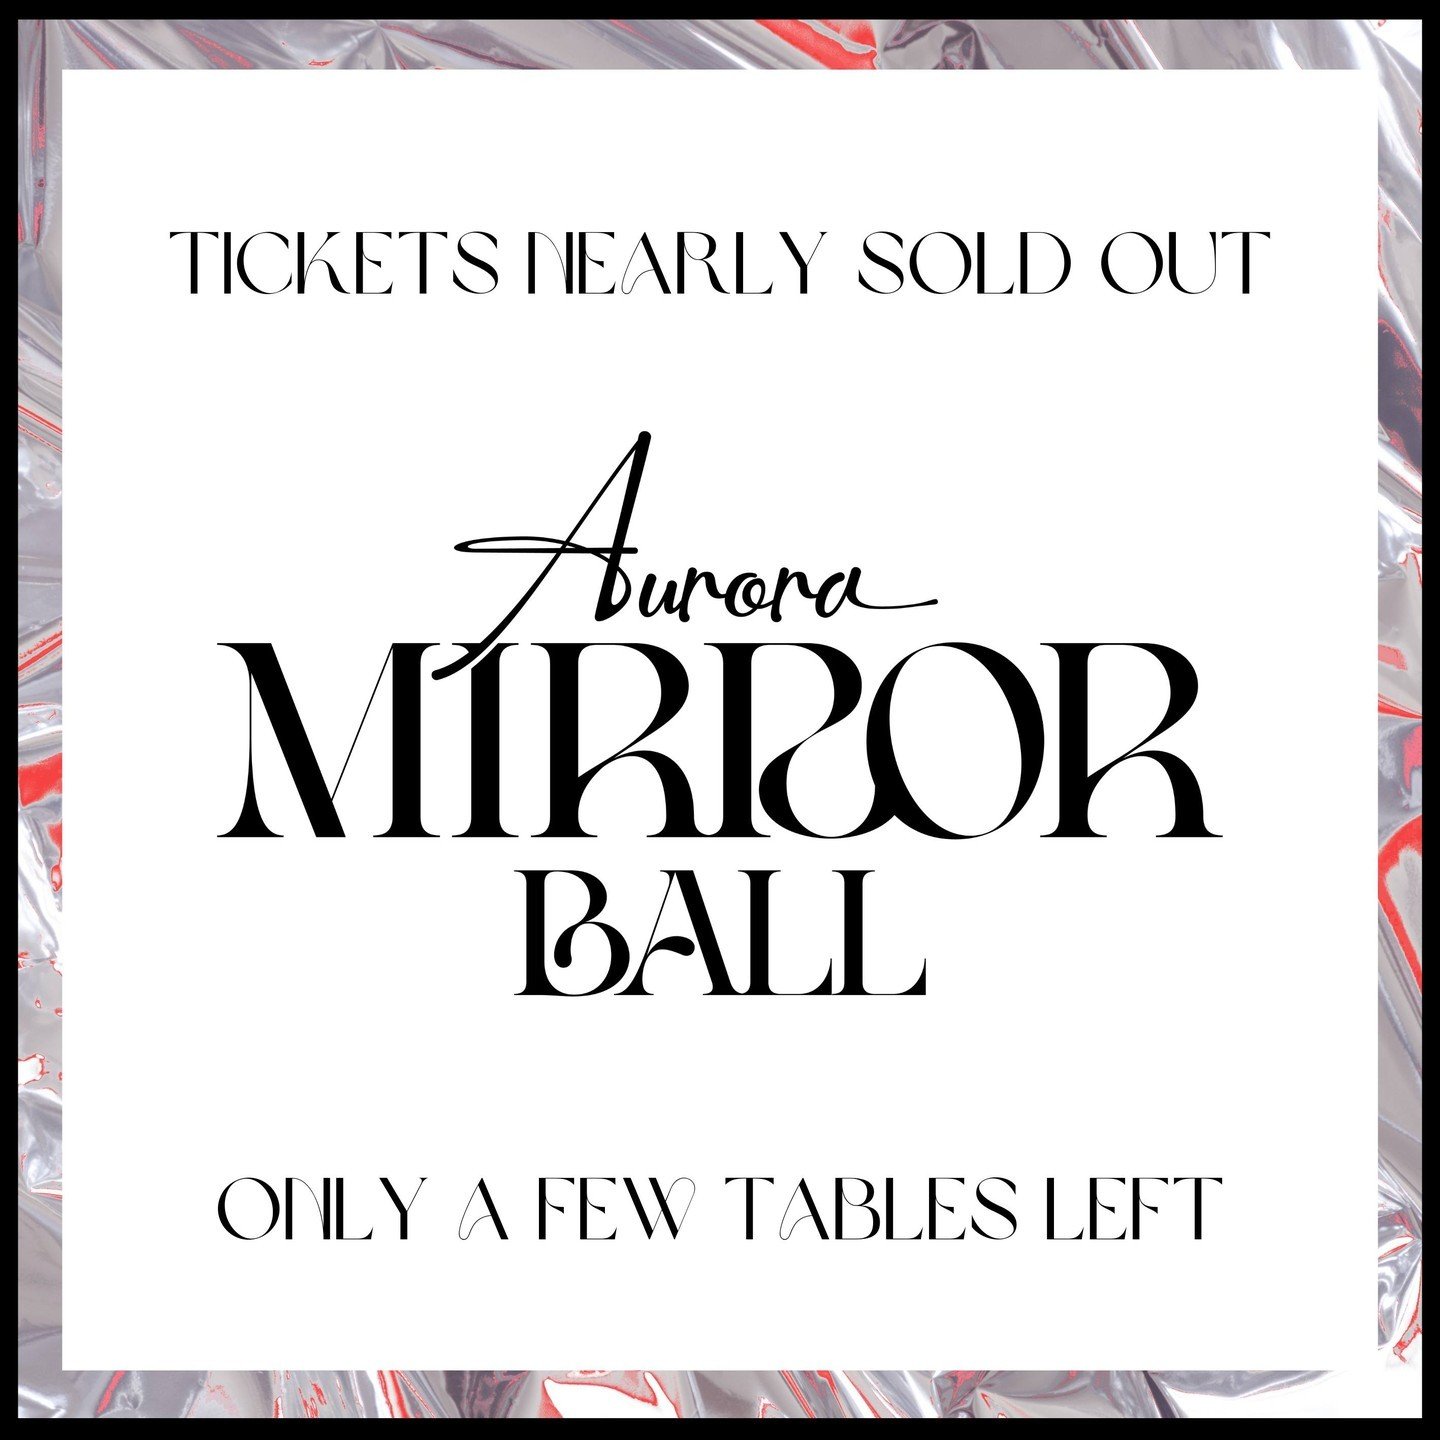 Tickets for the Ball have been selling FAST and we haven't even announced our stella line up of performers! 

There aren't many tickets left at all so if you're keen to celebrate at the Aurora Mirror Ball, especially if you're wanting to snap up a ta